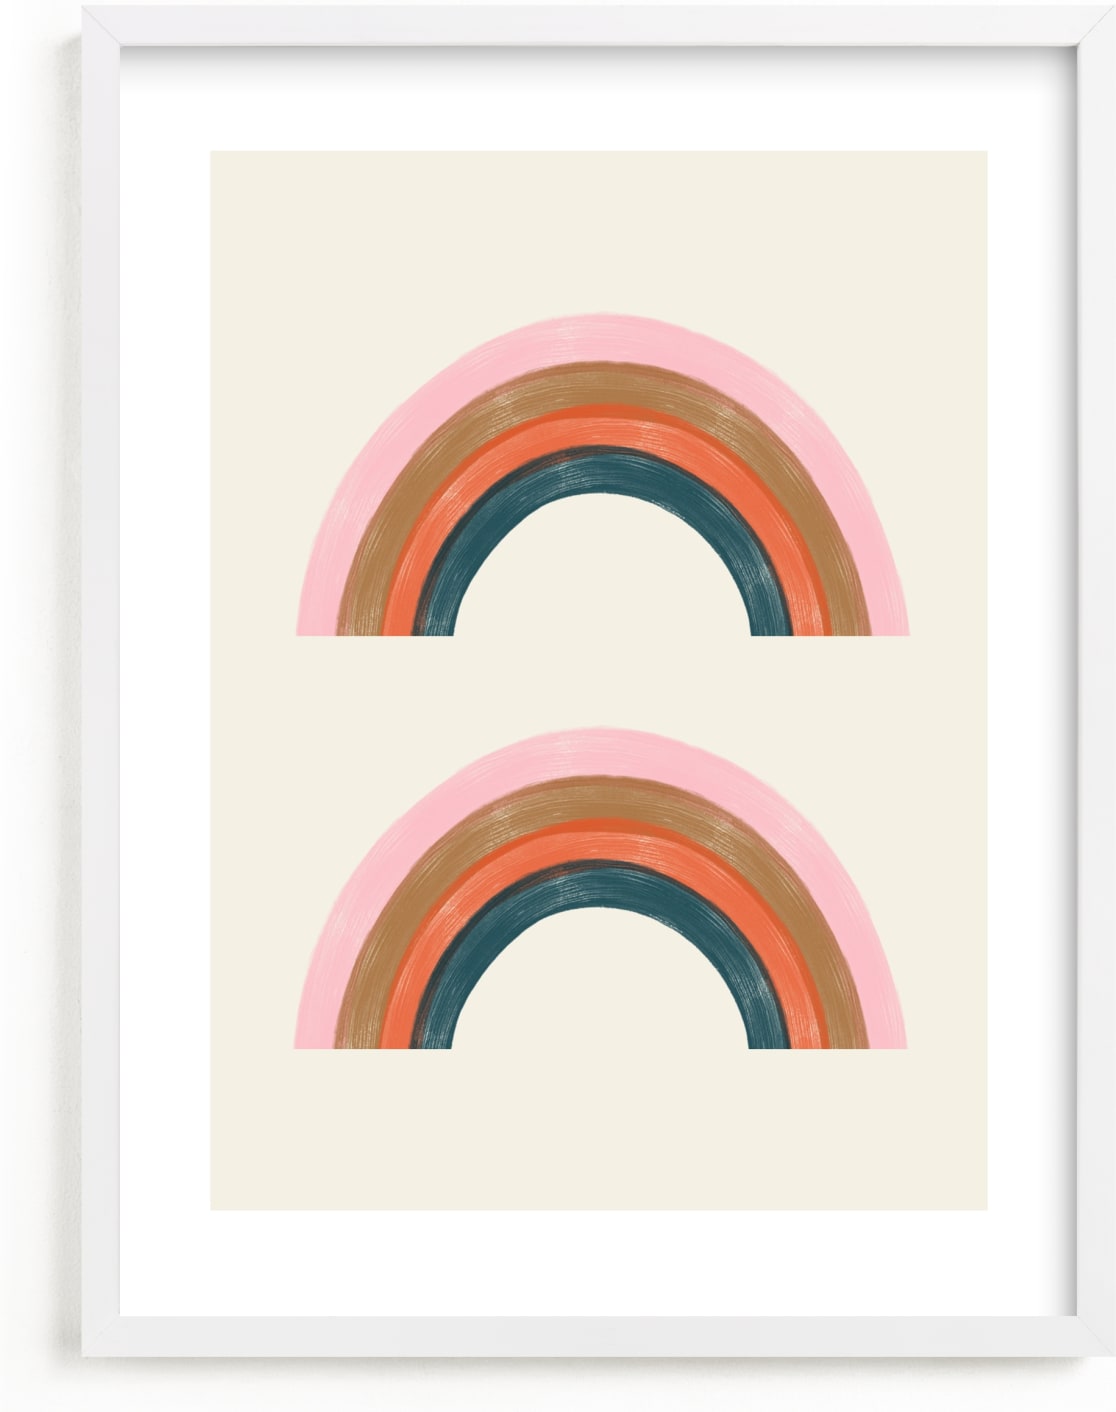 This is a pink kids wall art by EMANUELA CARRATONI called Double Vintage Rainbow.